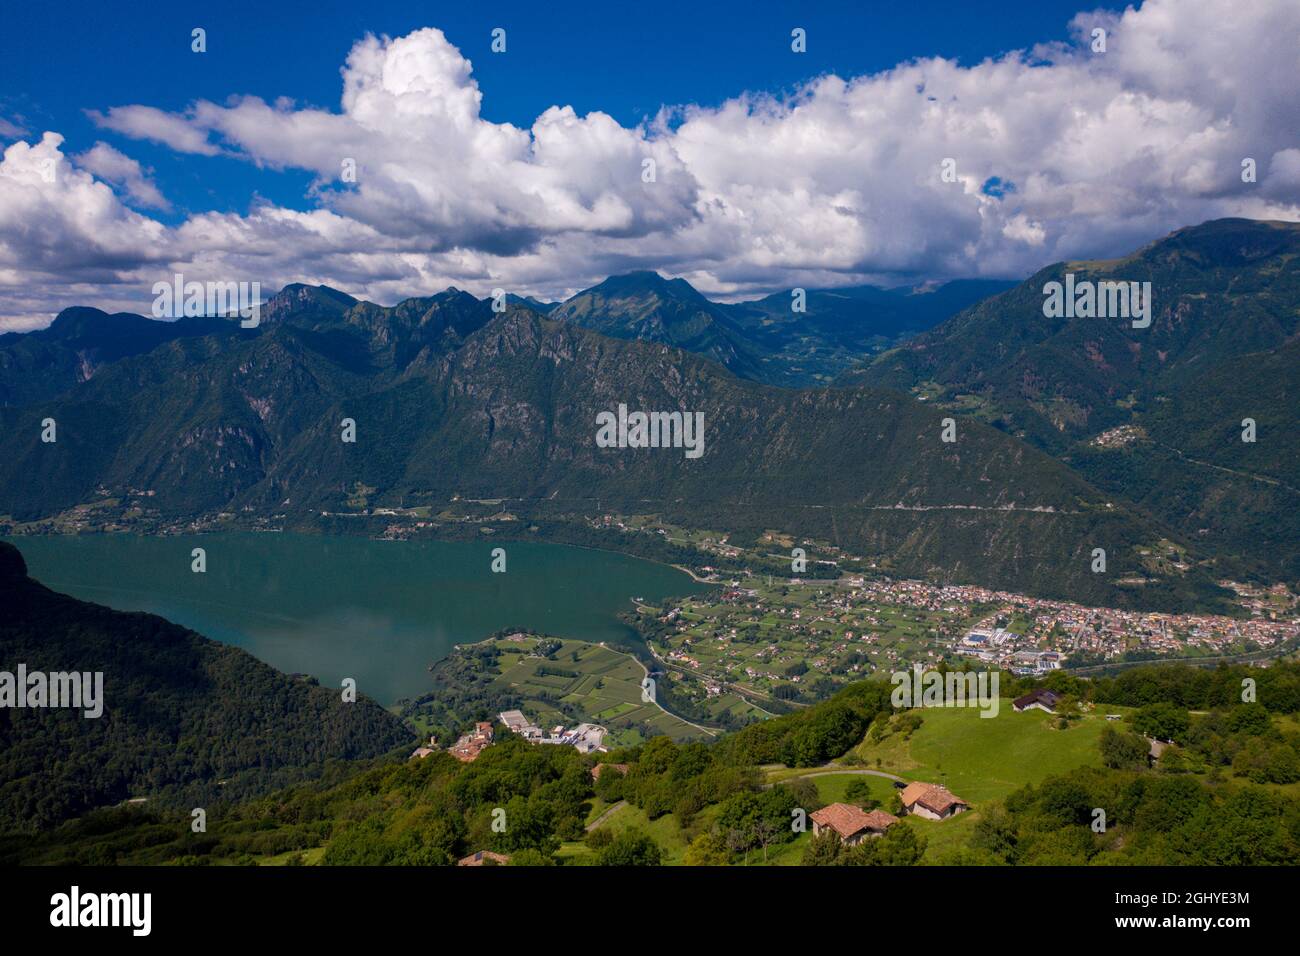 view of the northern part of the Lake Idro  with the river tributary Chiese, in the municipalities of Ponte Caffaro, Brescia, Italy Stock Photo